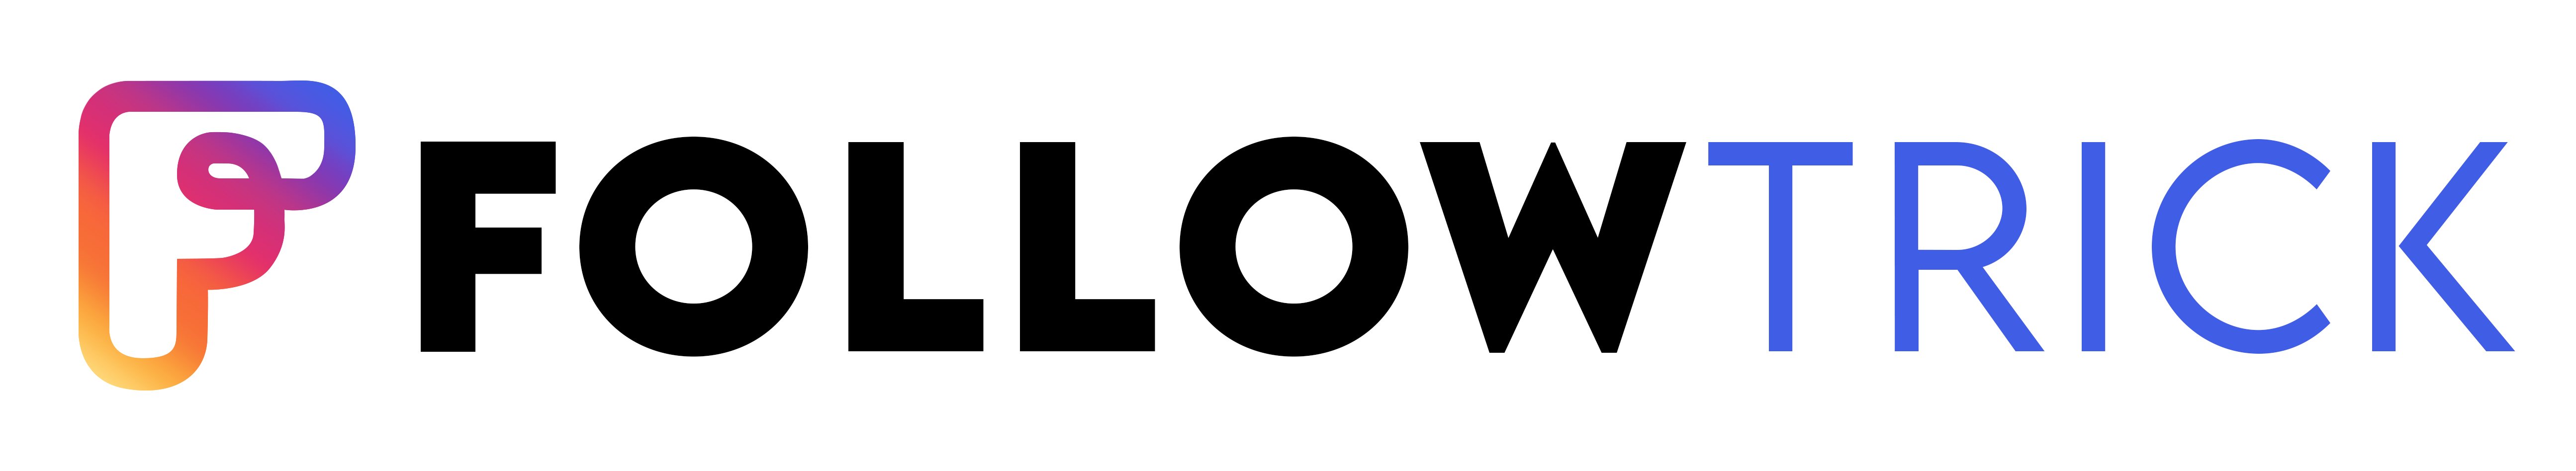 Follow Trick - Buy followers for social media and grow your audience